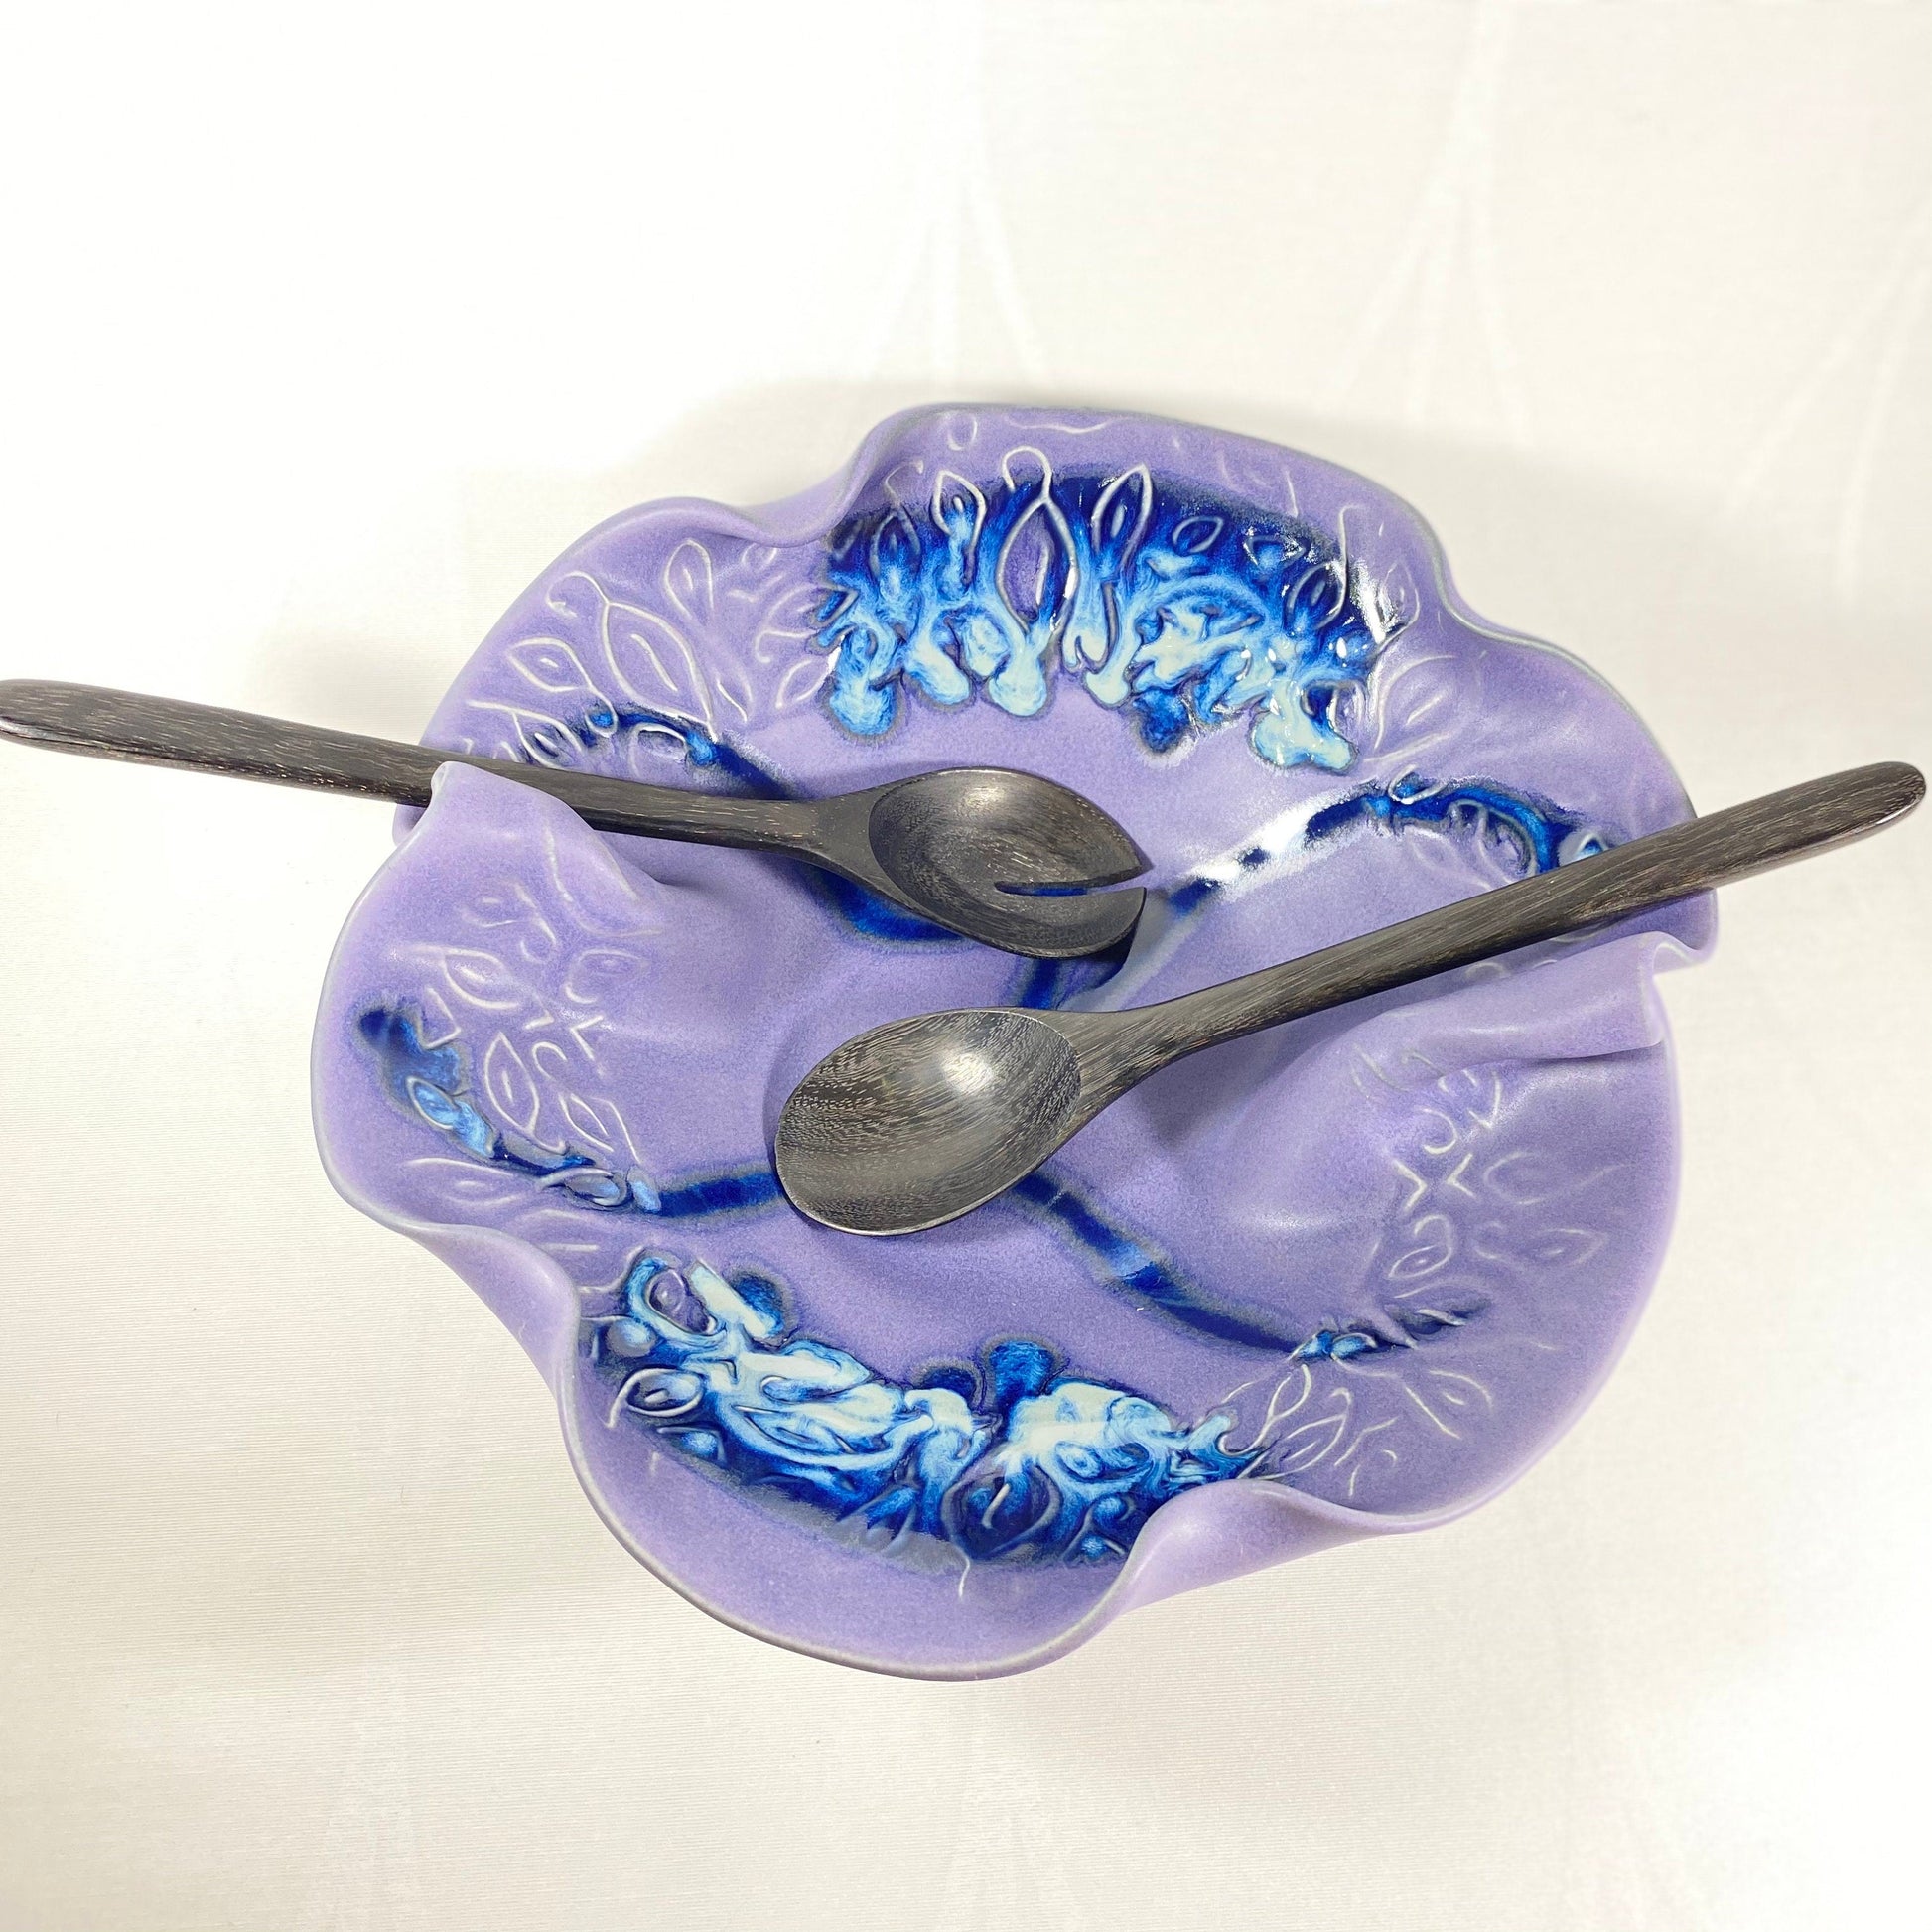 Handmade Purple and Blue In Between Bowl with Serving Spoons, Functional and Decorative Pottery